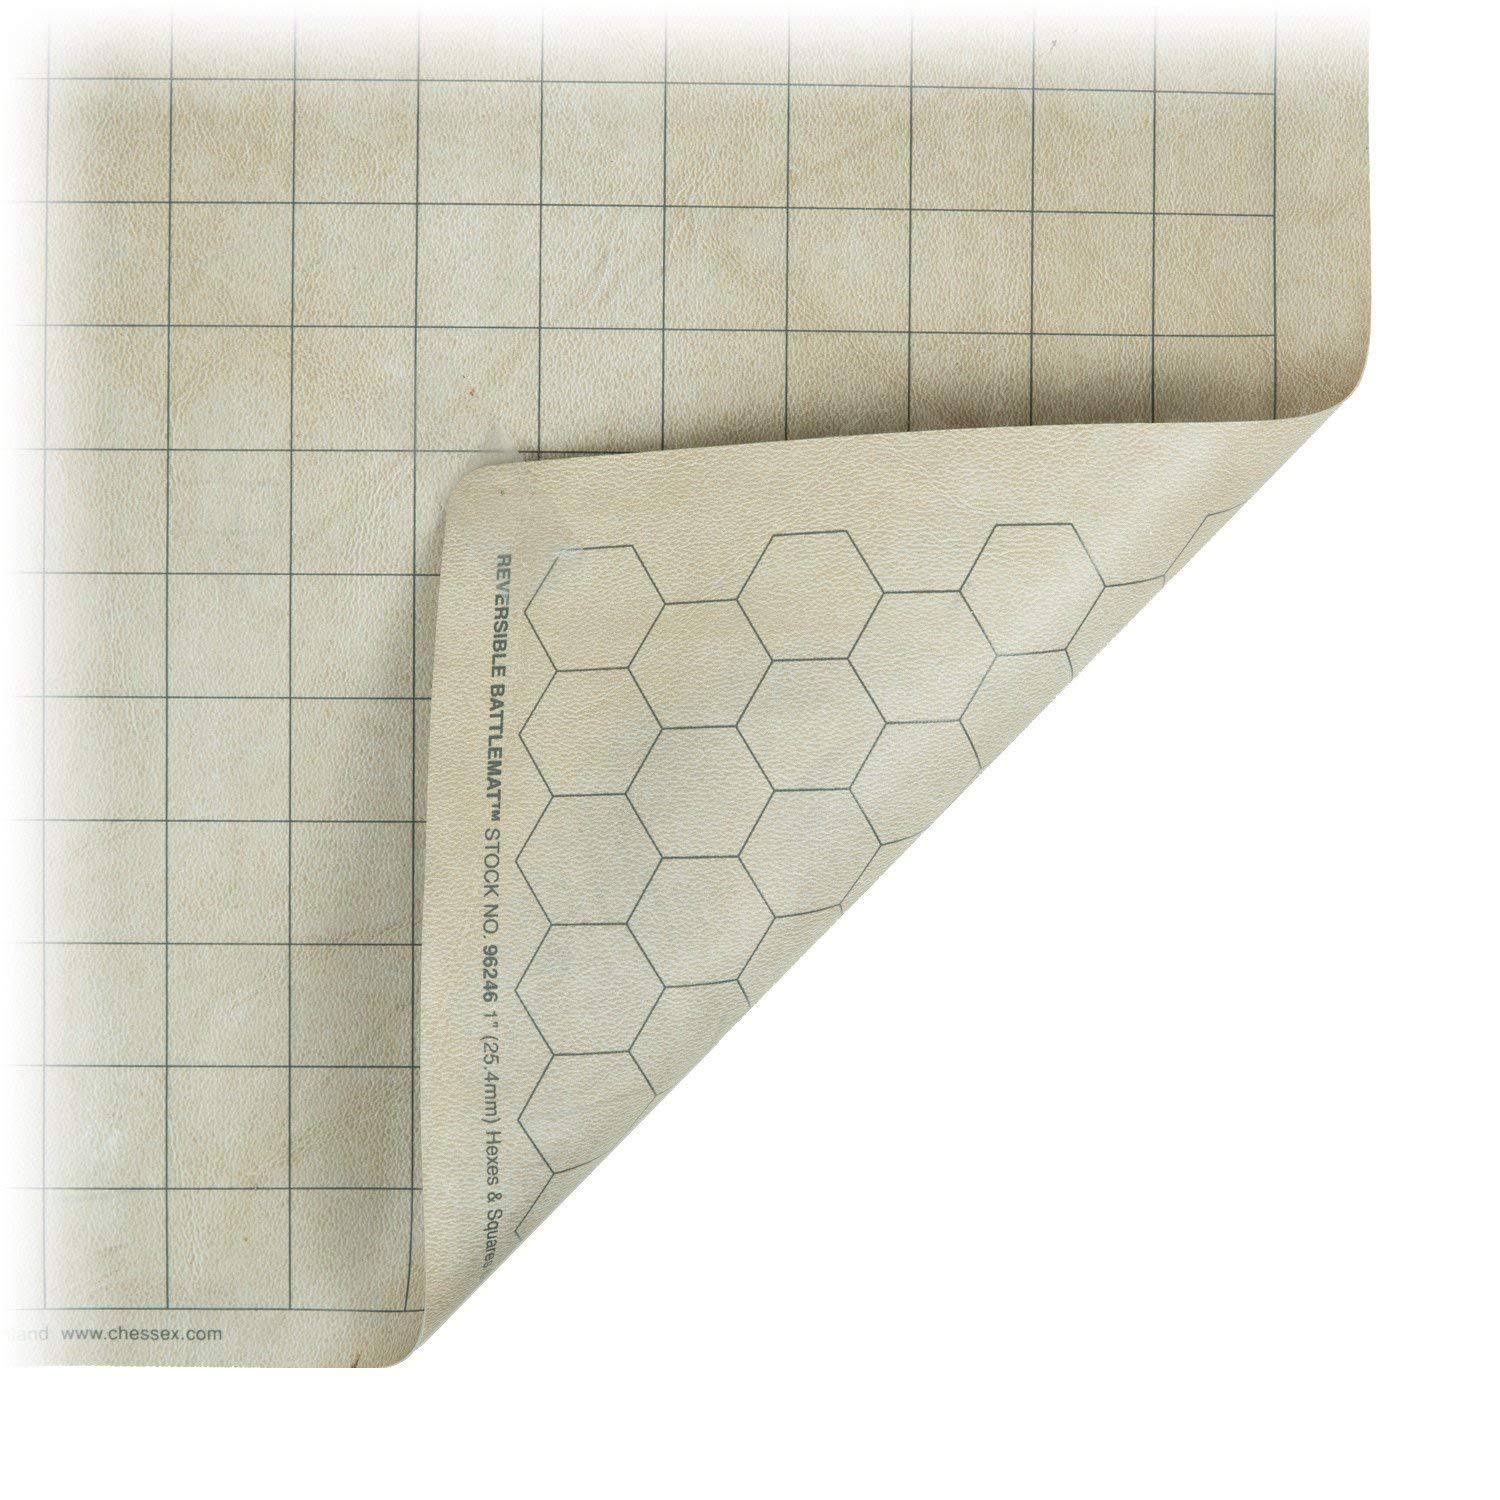 Reversible Battlemat 1 Squares & 1 Hexes (23.5 x 26 Inches)